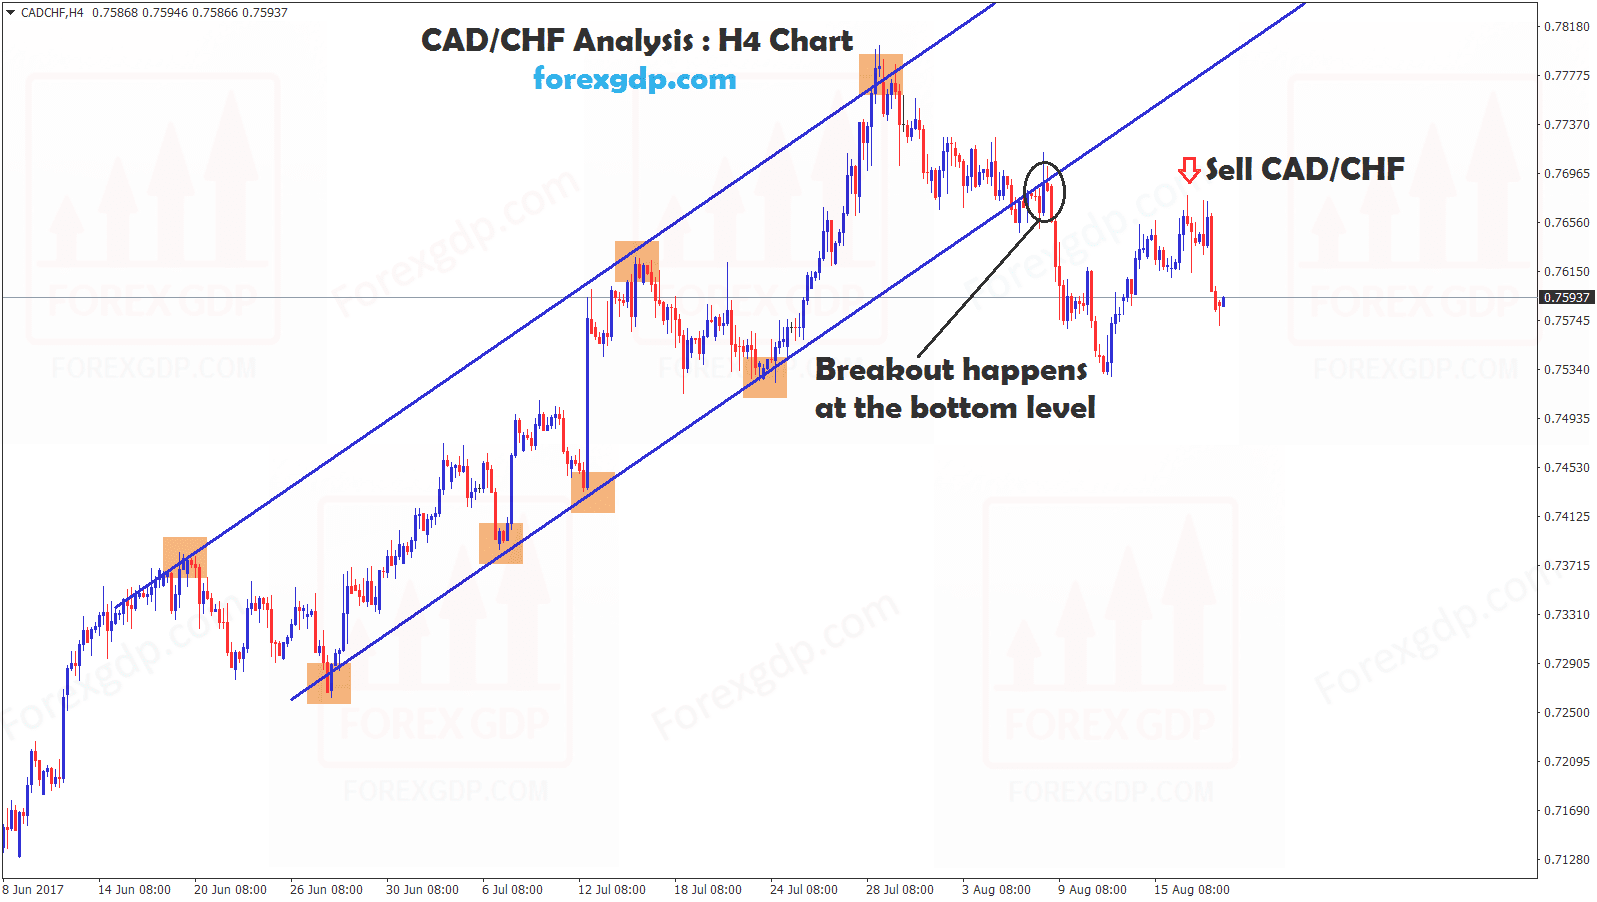 Reversal confirmed after breakout at the up trend line in CADCHF 4hr chart